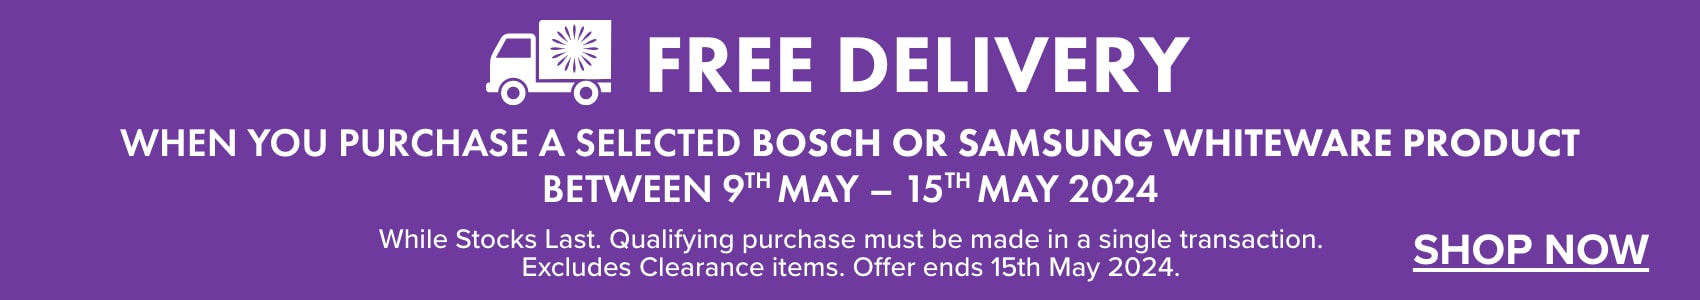 FREE DELIVERY when you purchase a selected Bosch or Samsung Whiteware Product between 9th – 15th May 2024